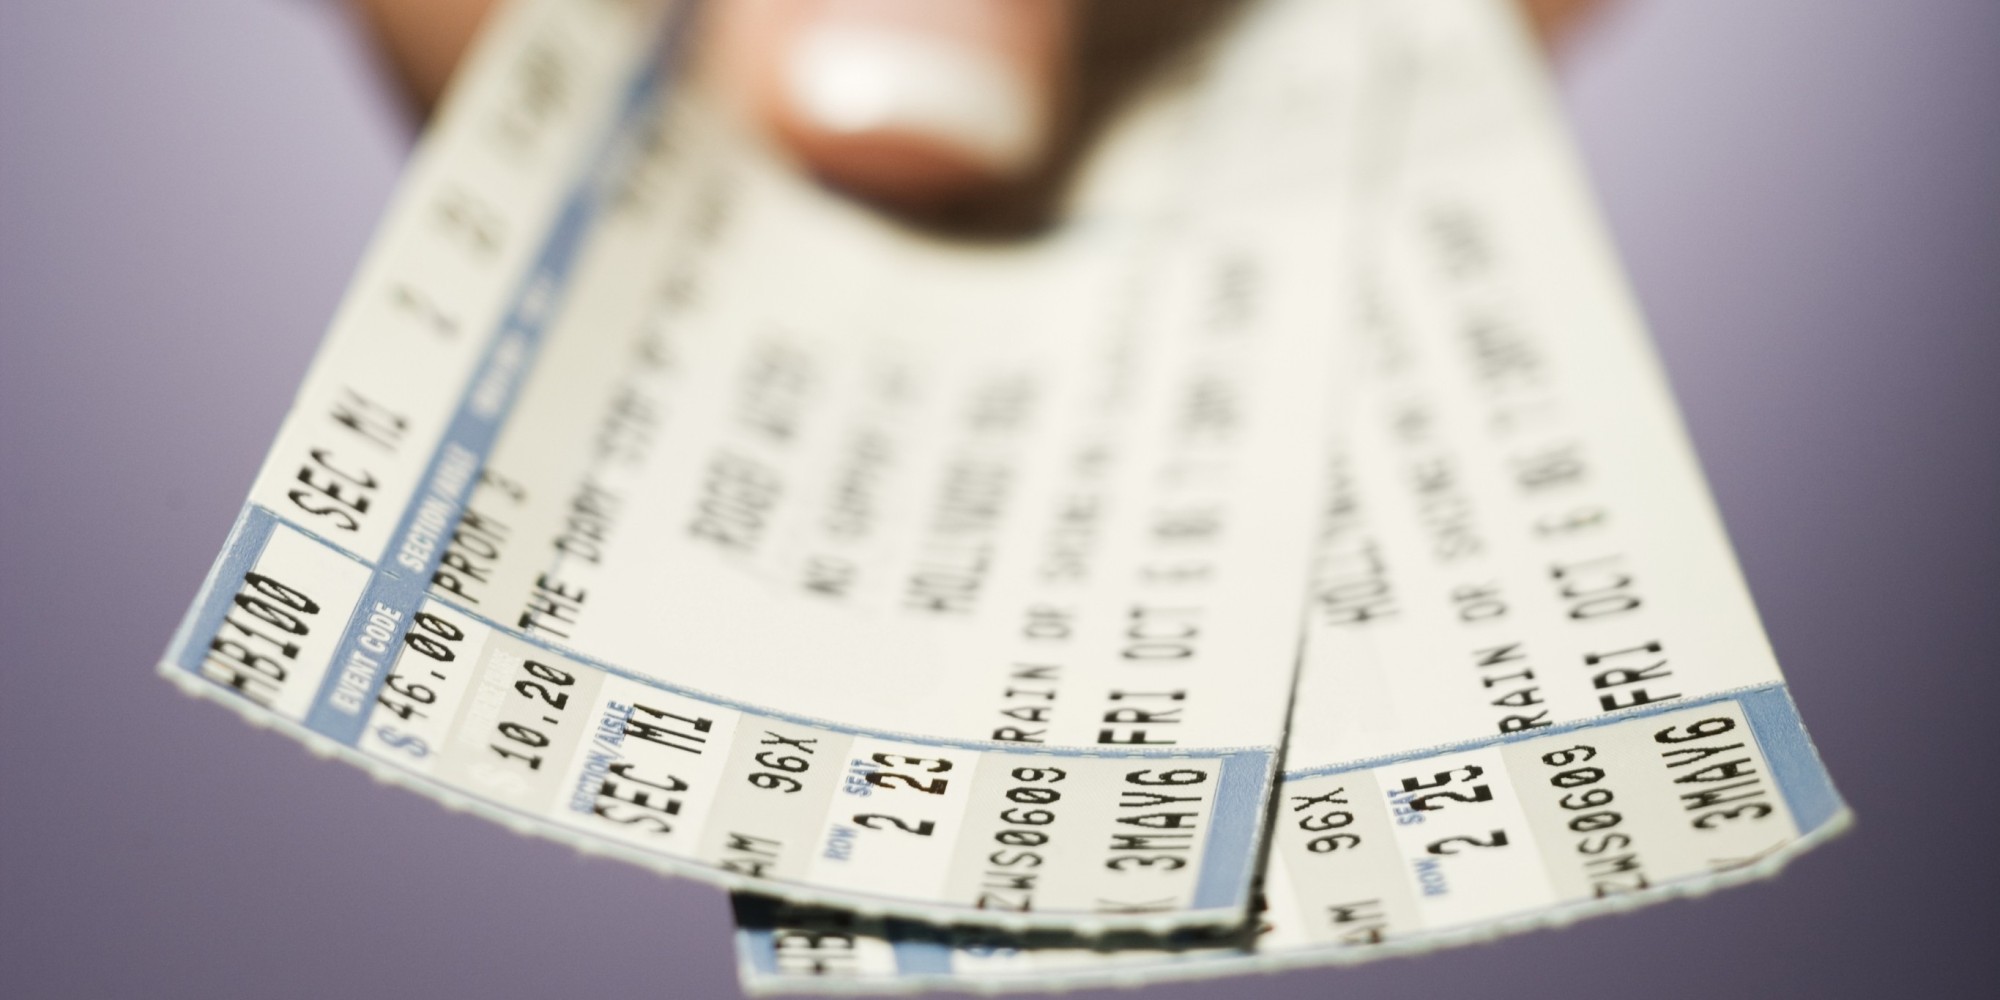 How to beat ticket scalpers and get tickets to your favorite concerts